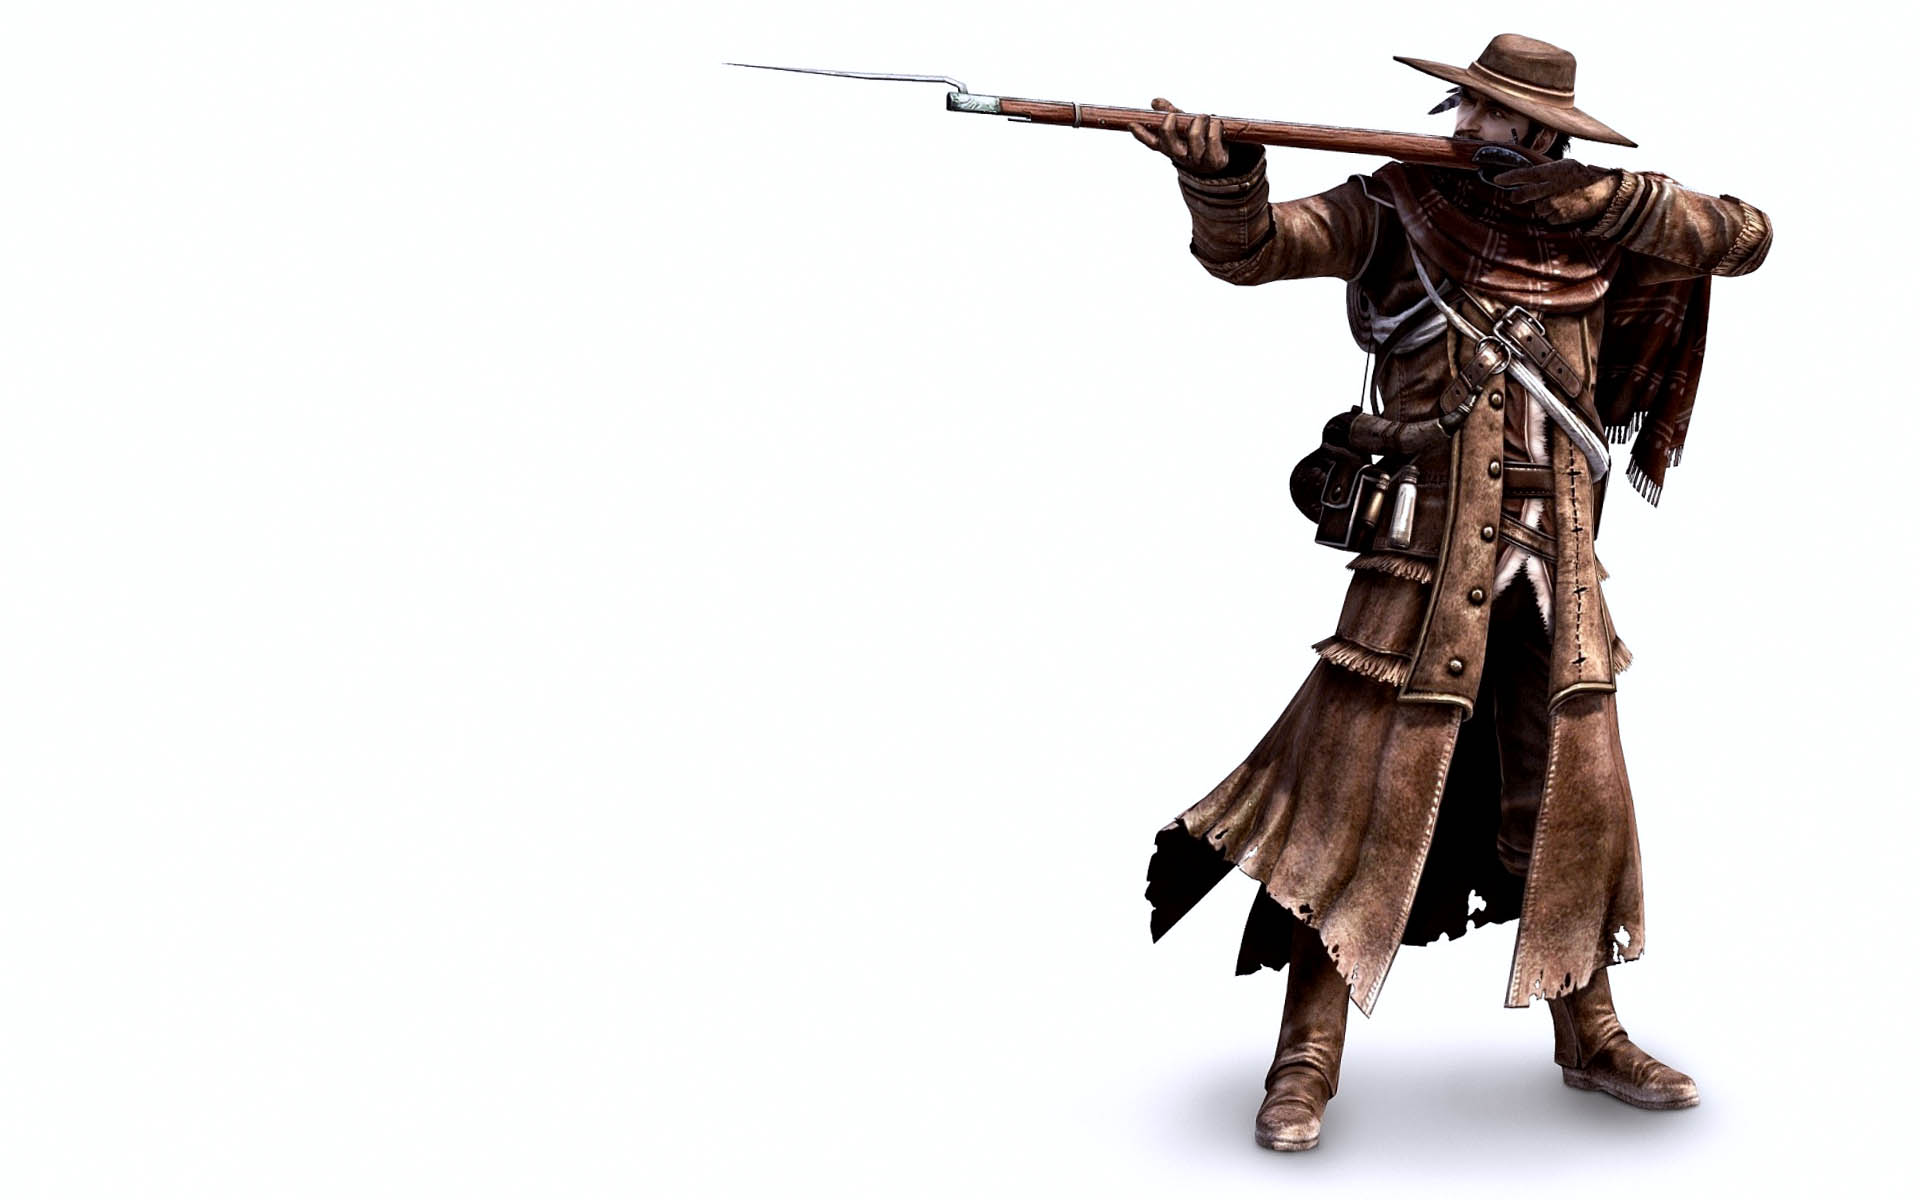 Fantasy Cowboy Snipers 3d Picture - Redcoat Assassin's Creed 3 , HD Wallpaper & Backgrounds